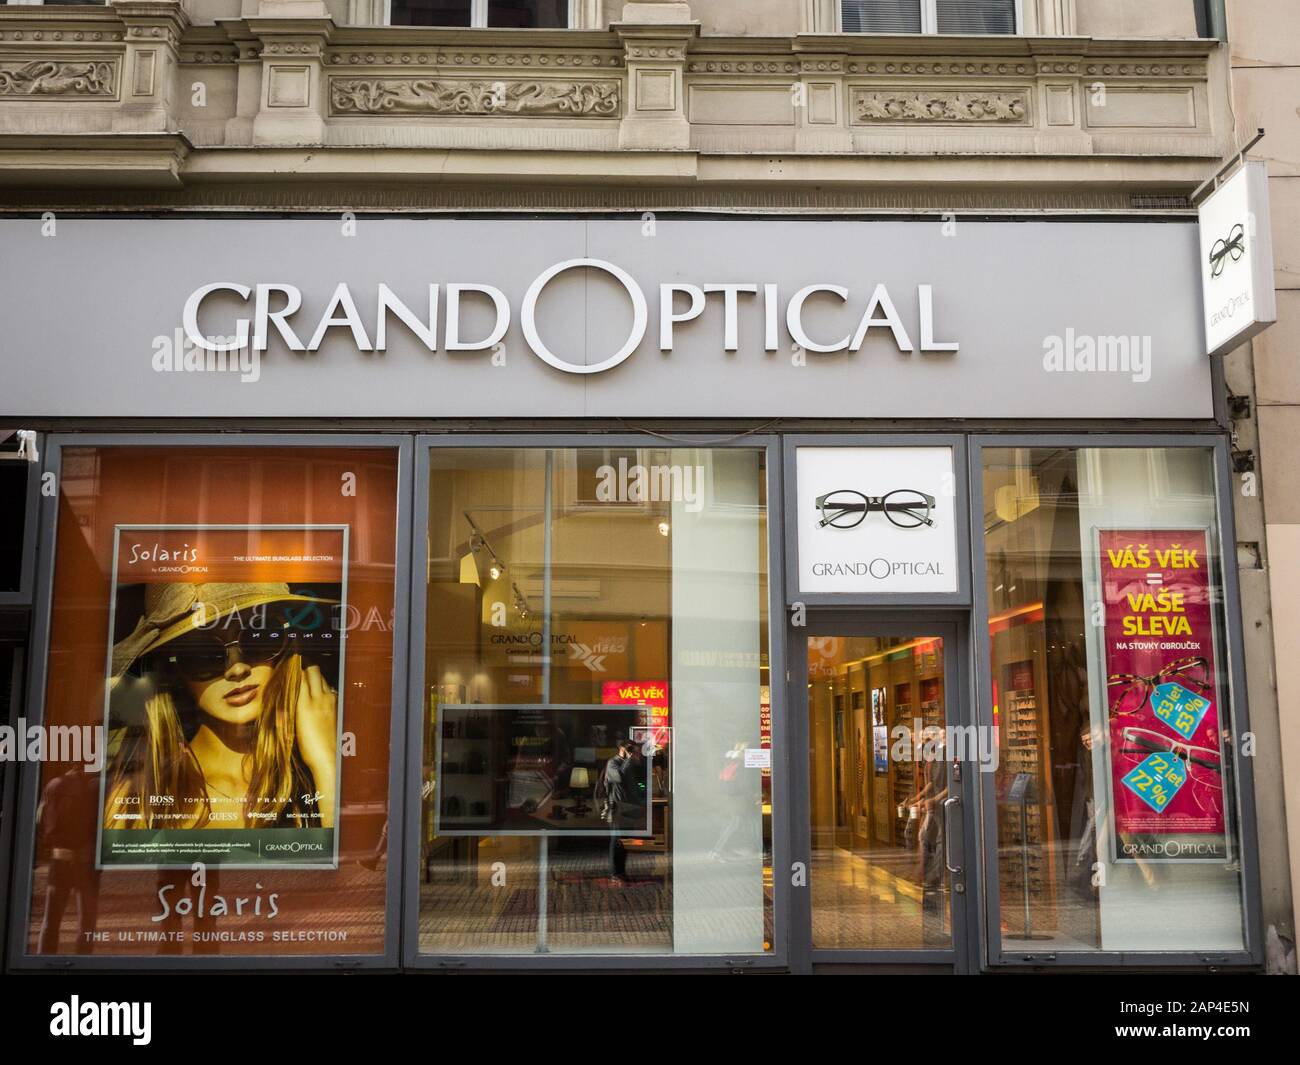 PRAGUE - CZECHIA - NOVEMBER 2, 2019: Grandoptical Logo in front of their shop for Prague. Grand optical is a French chain of optical and optician stor Stock Photo